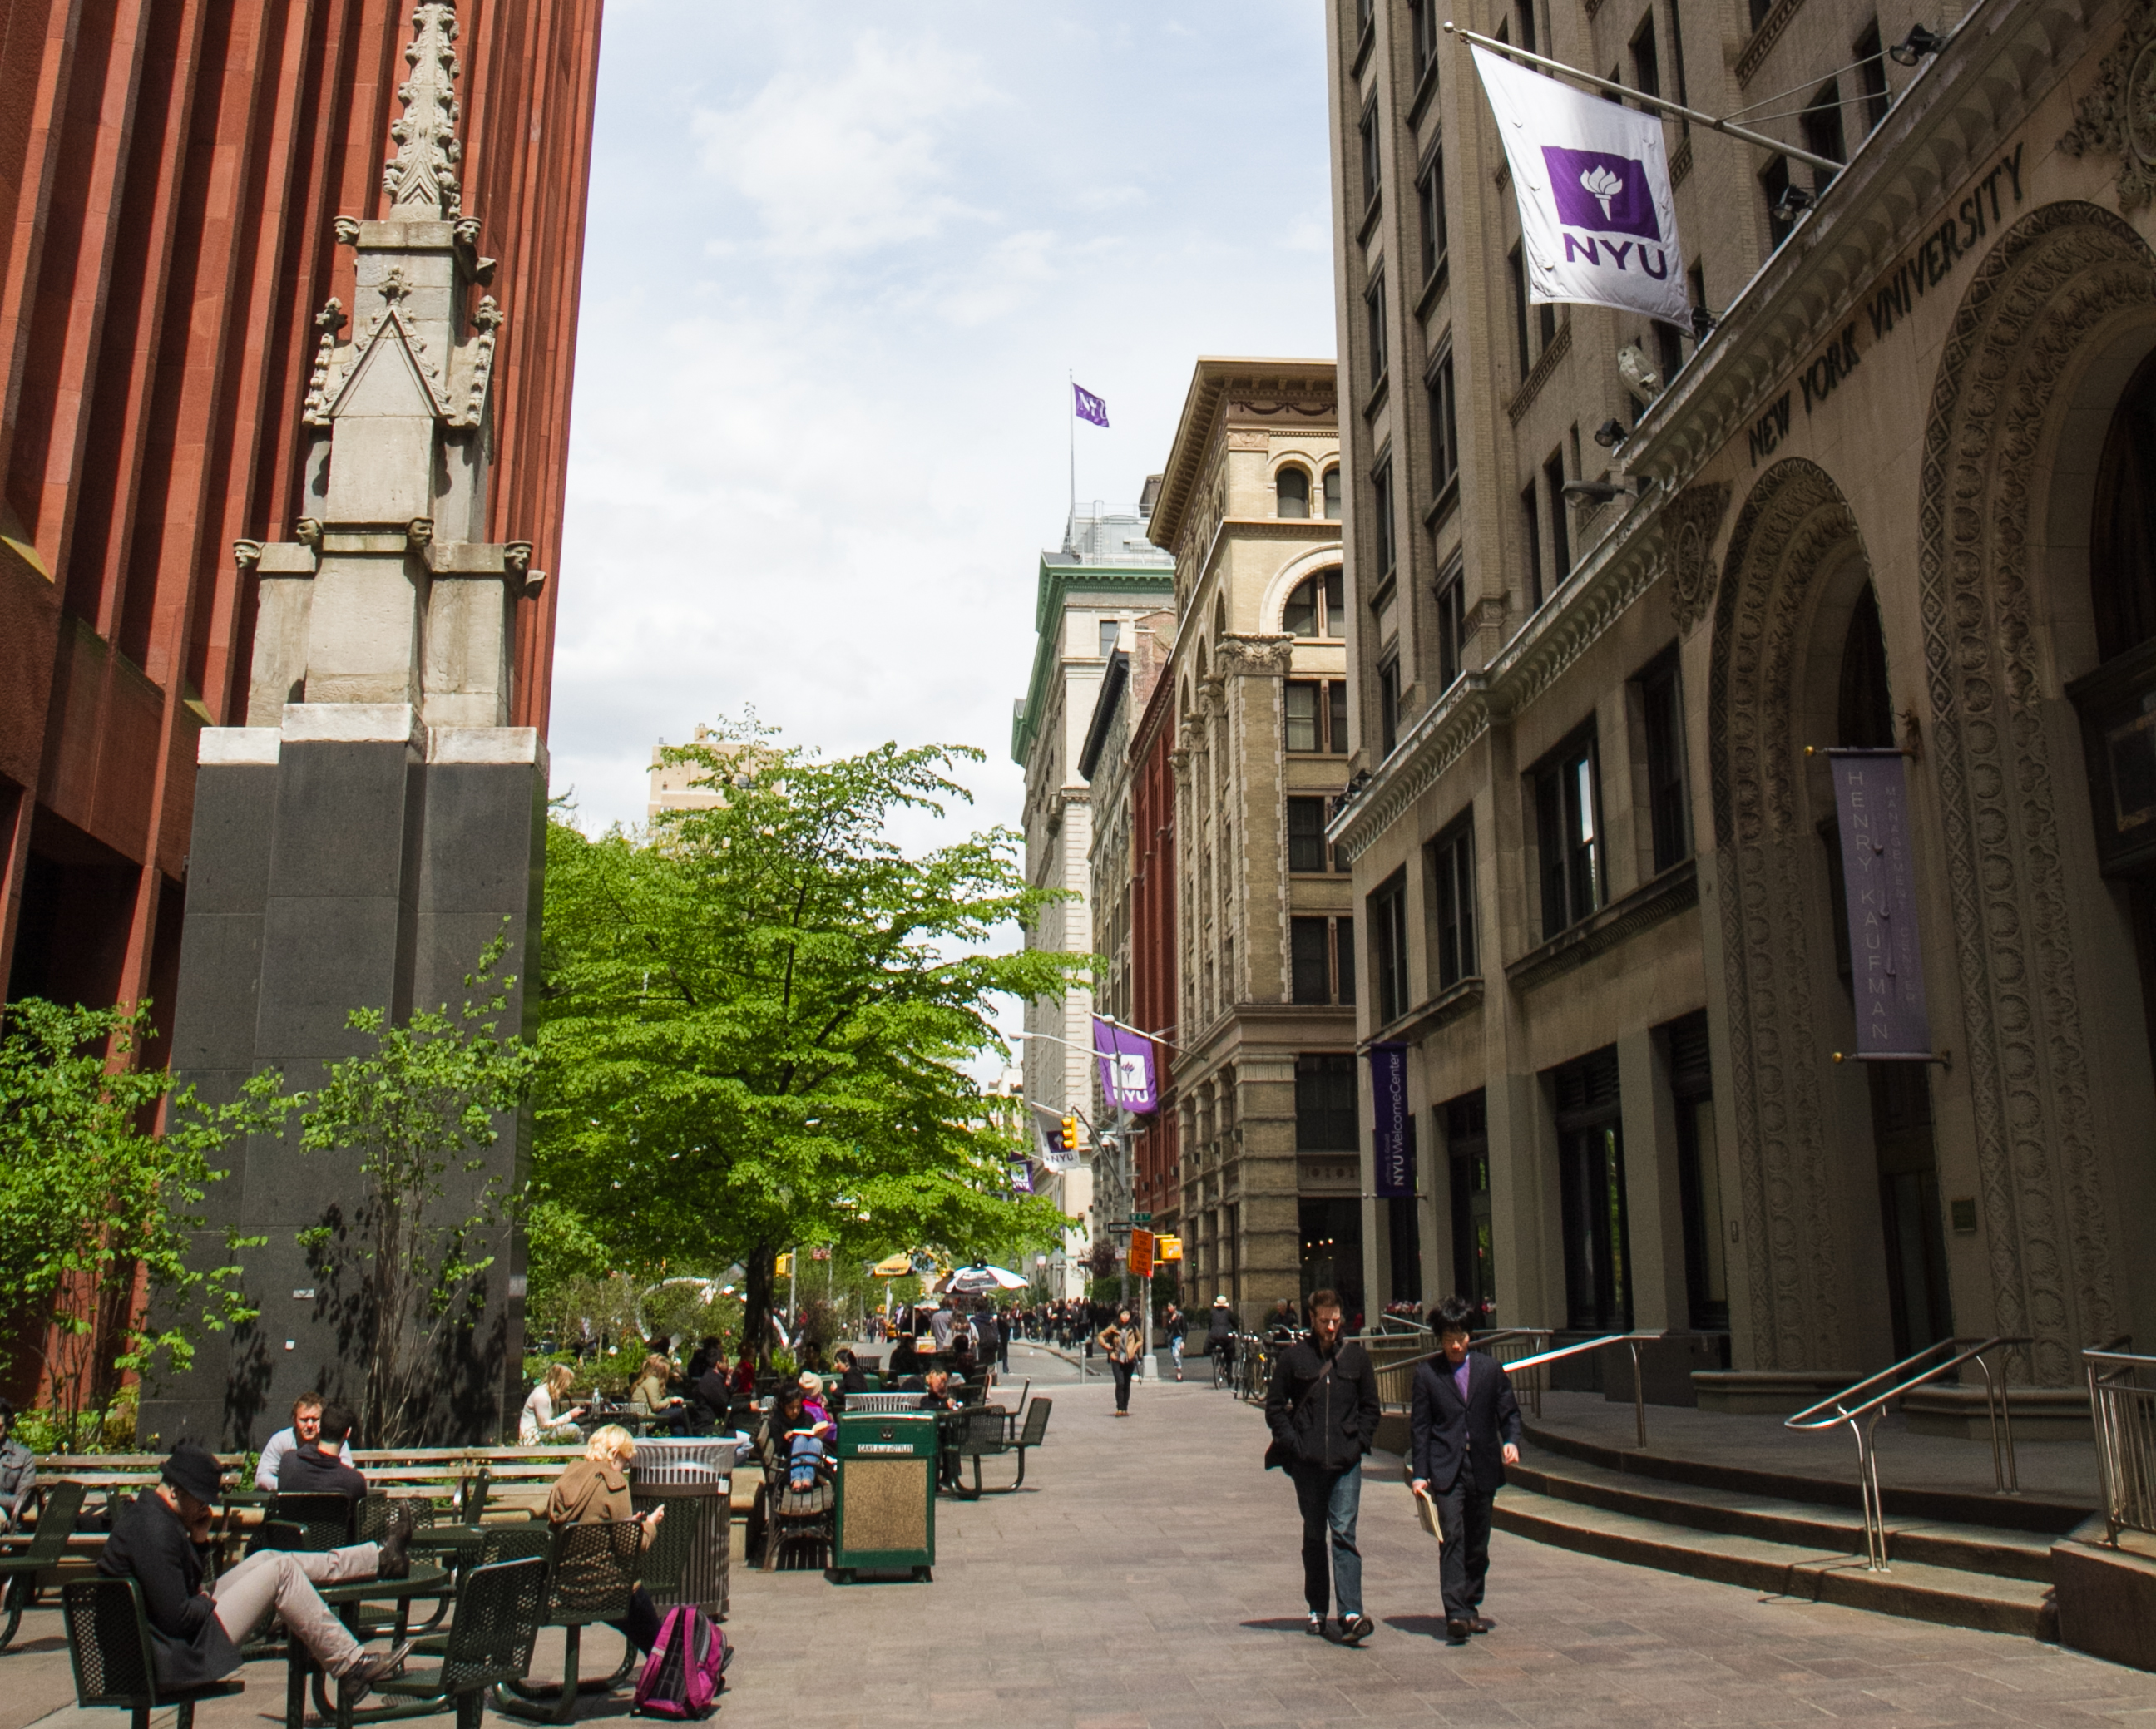 People walk on the NYU campus in New York City on April 24, 2012. (Benjamin Chasteen/The Epoch Times)